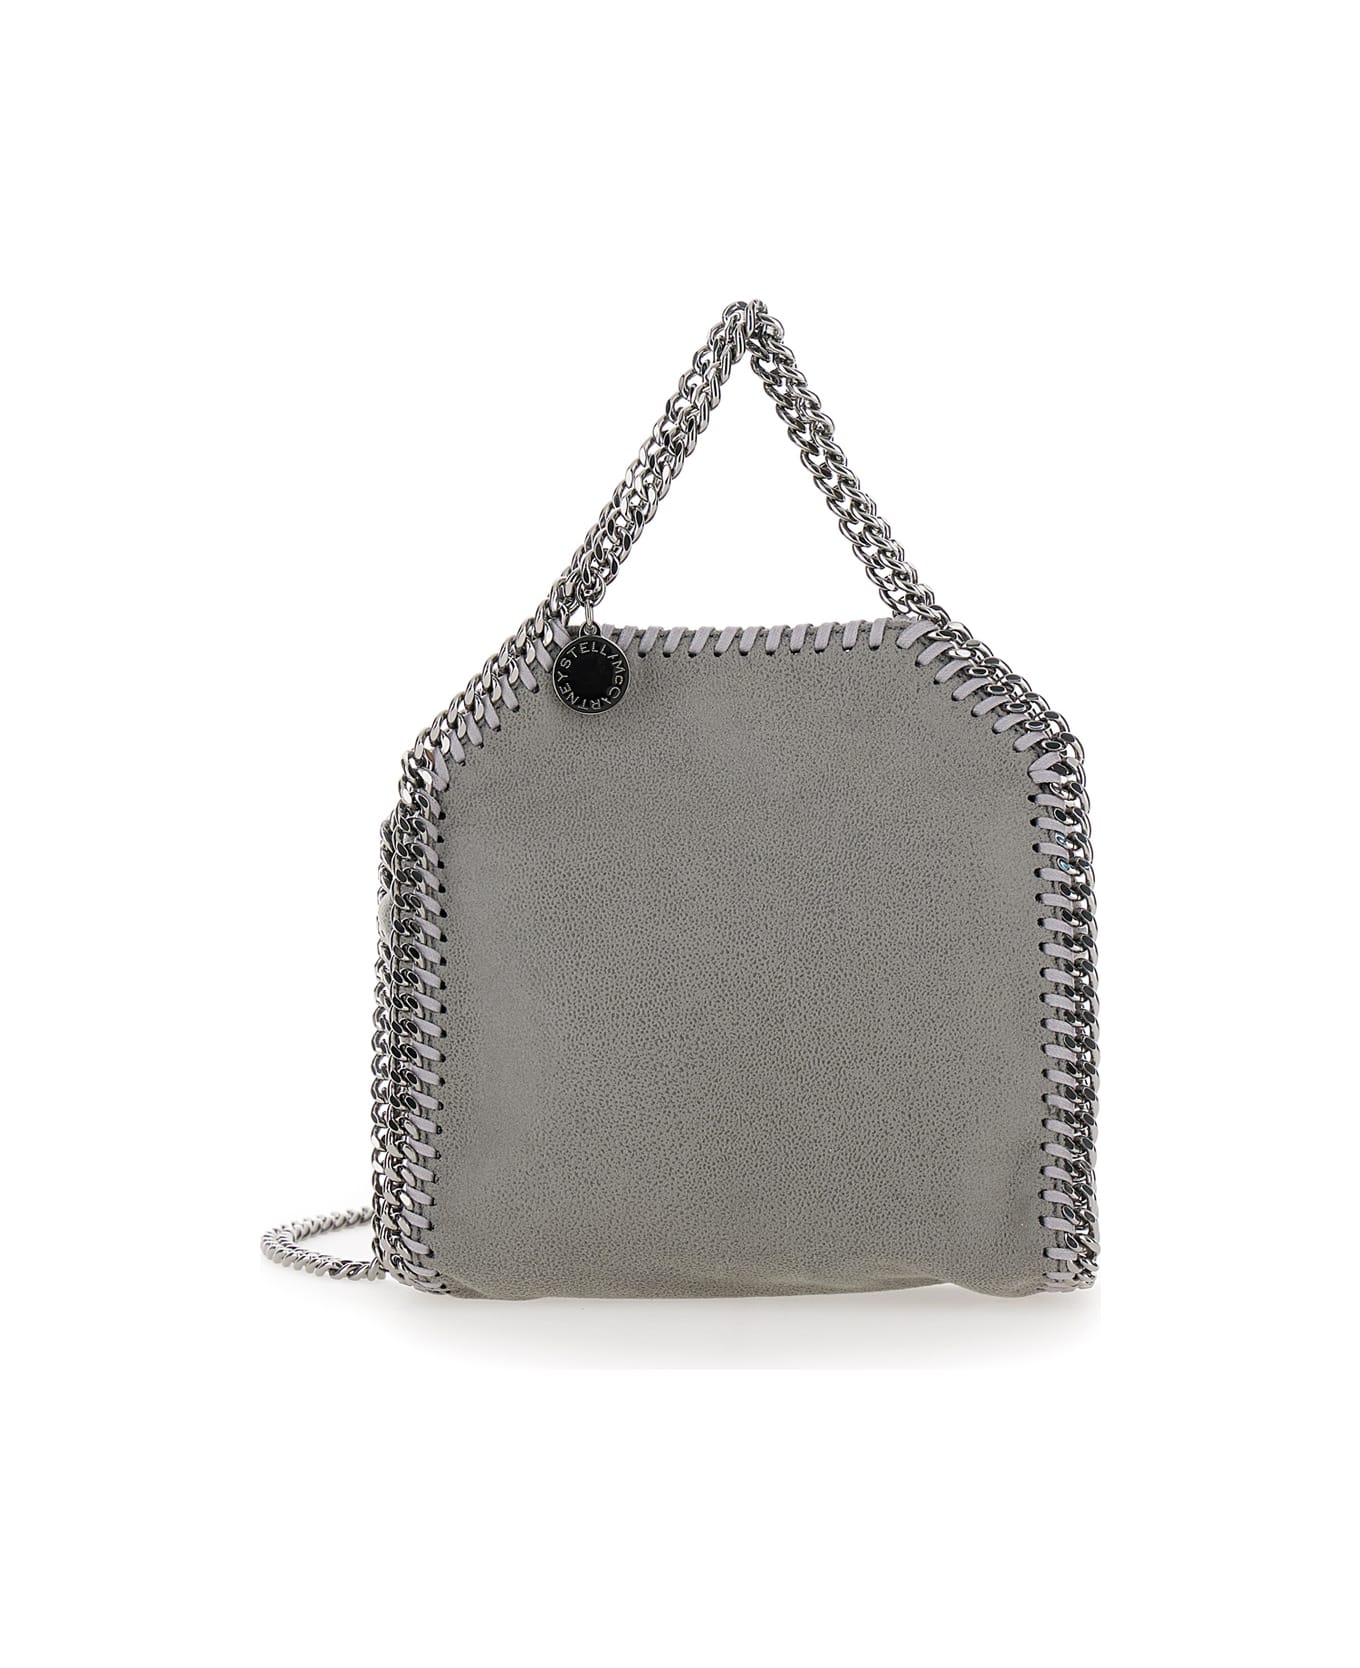 Stella McCartney '3chain' Tiny Grey Tote Bag With Logo Engraved On Charm In Faux Leather Woman - Grey